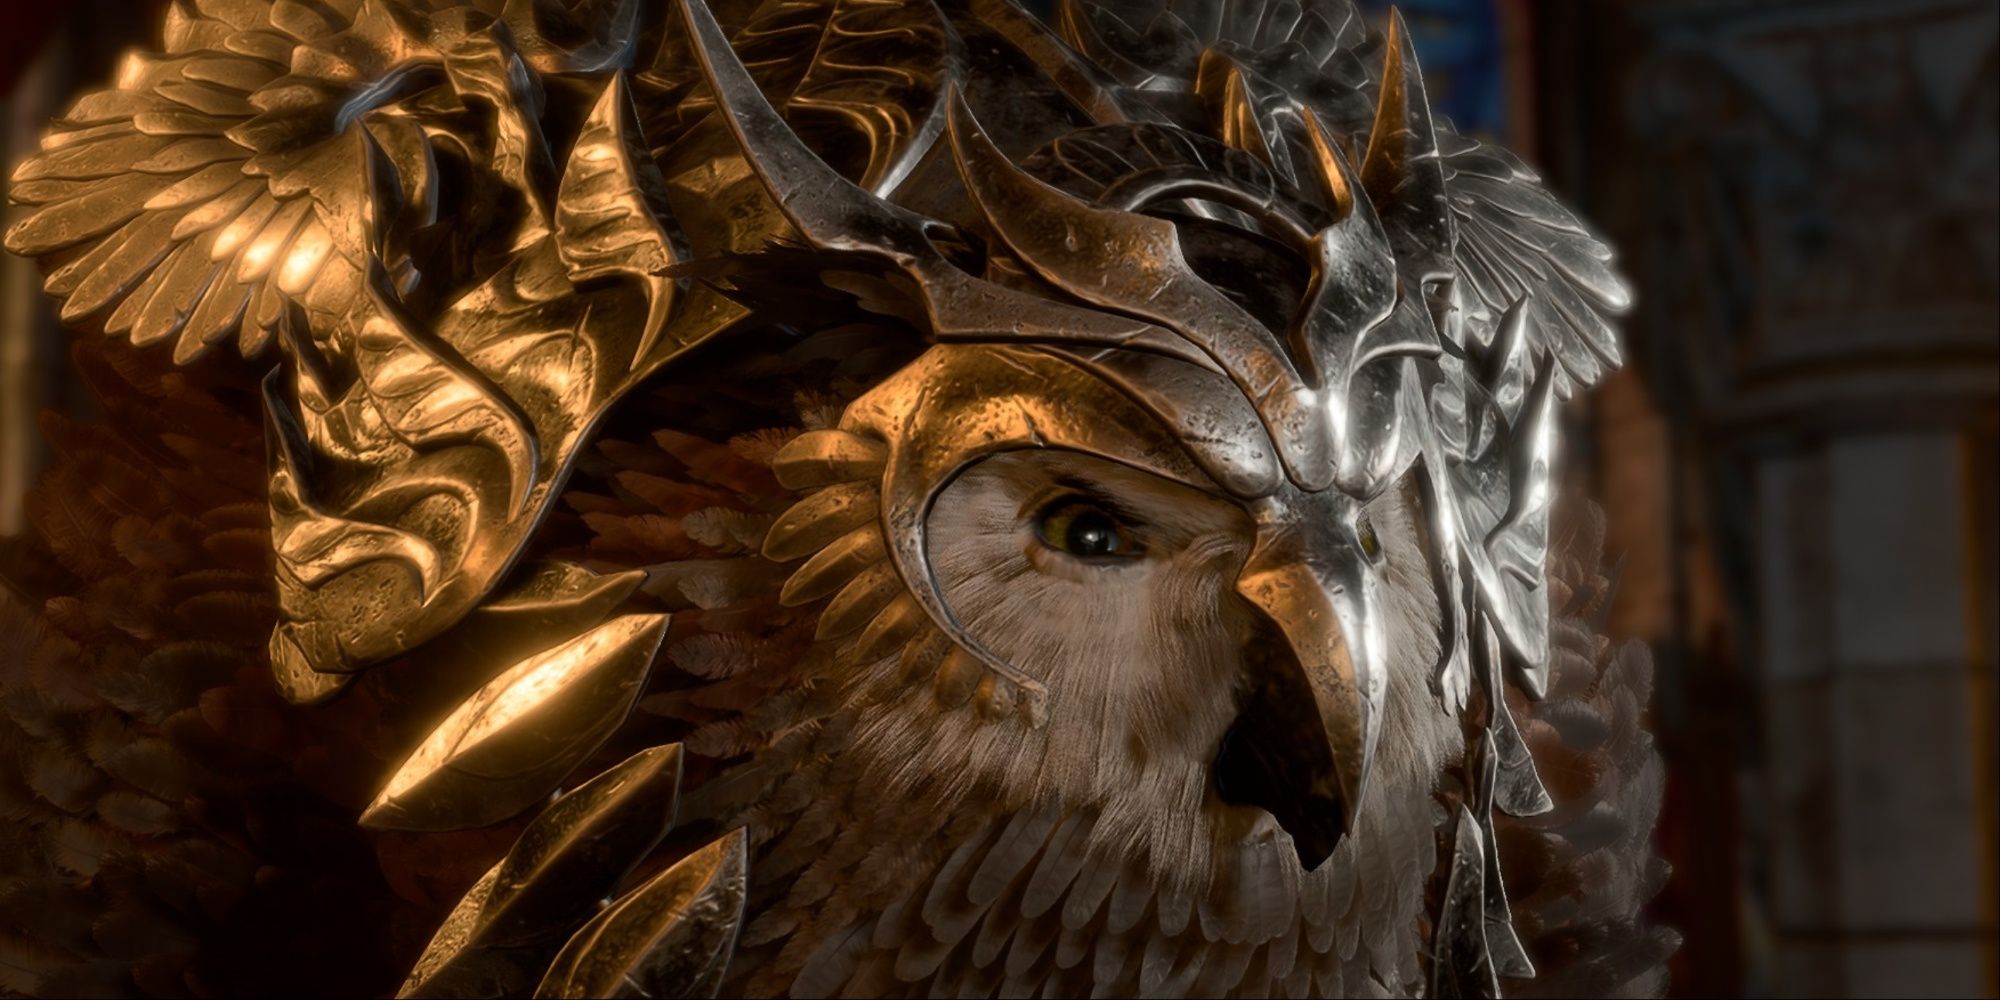 Grown Up Owlbear Cub Is Fully Armored And Ready For Battle In Baldur's Gate 3